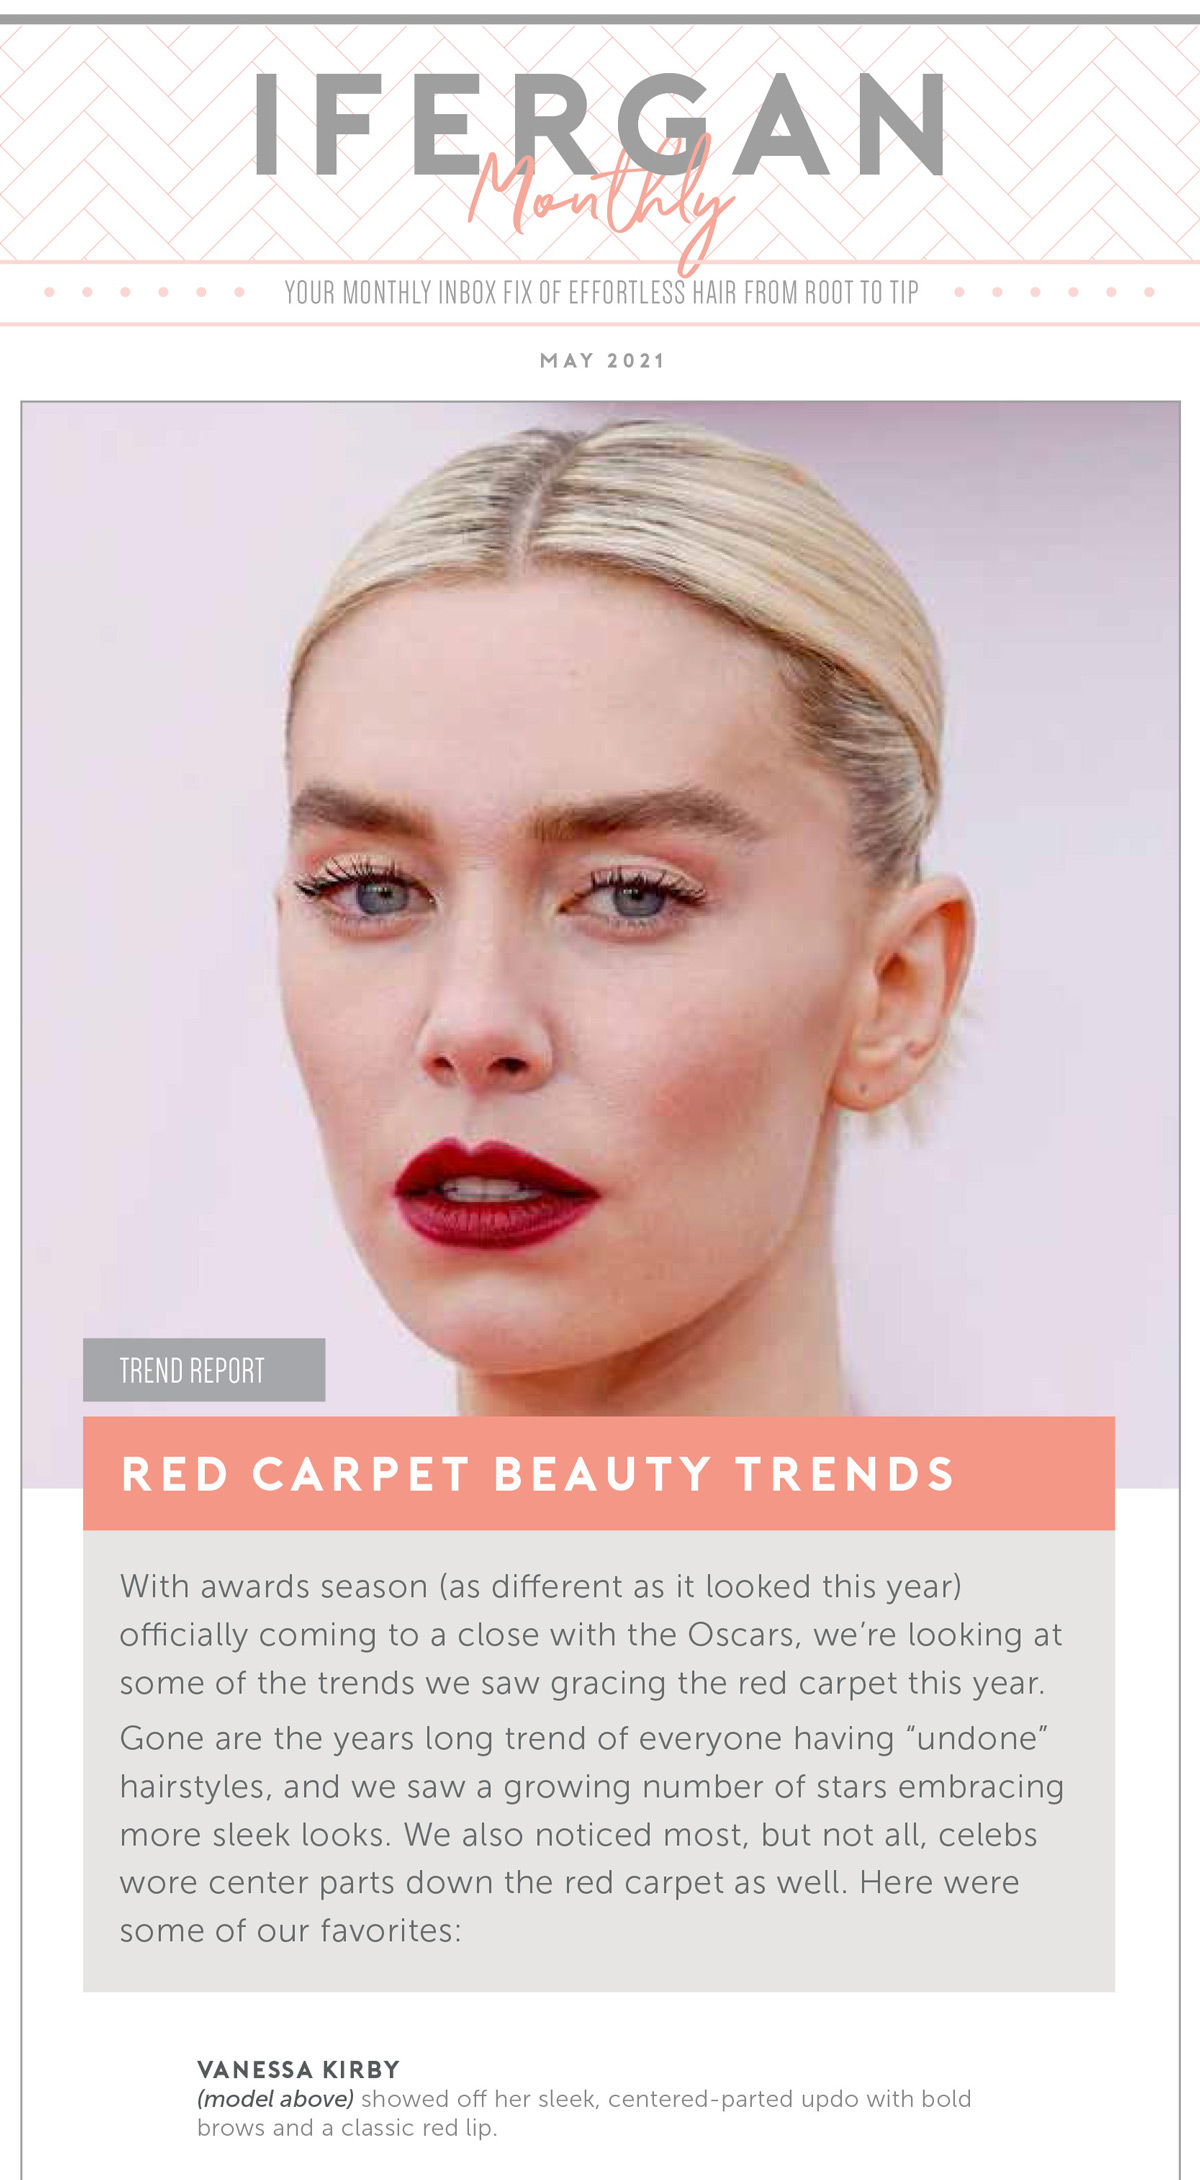 May Newsletter: Red Carpet Beauty Trends. With awards season (as different as it looked this year) officially coming to a close with the Oscars, we’re looking at some of the trends we saw gracing the red carpet this year. Gone are the years long trend of everyone having “undone” hairstyles, and we saw a growing number of stars embracing more sleek looks. We also noticed most, but not all, celebs wore center parts down the red carpet as well. Here were some of our favorites: Vanessa Kirby showed off her sleek, centered-parted updo with bold brows and a classic red lip.